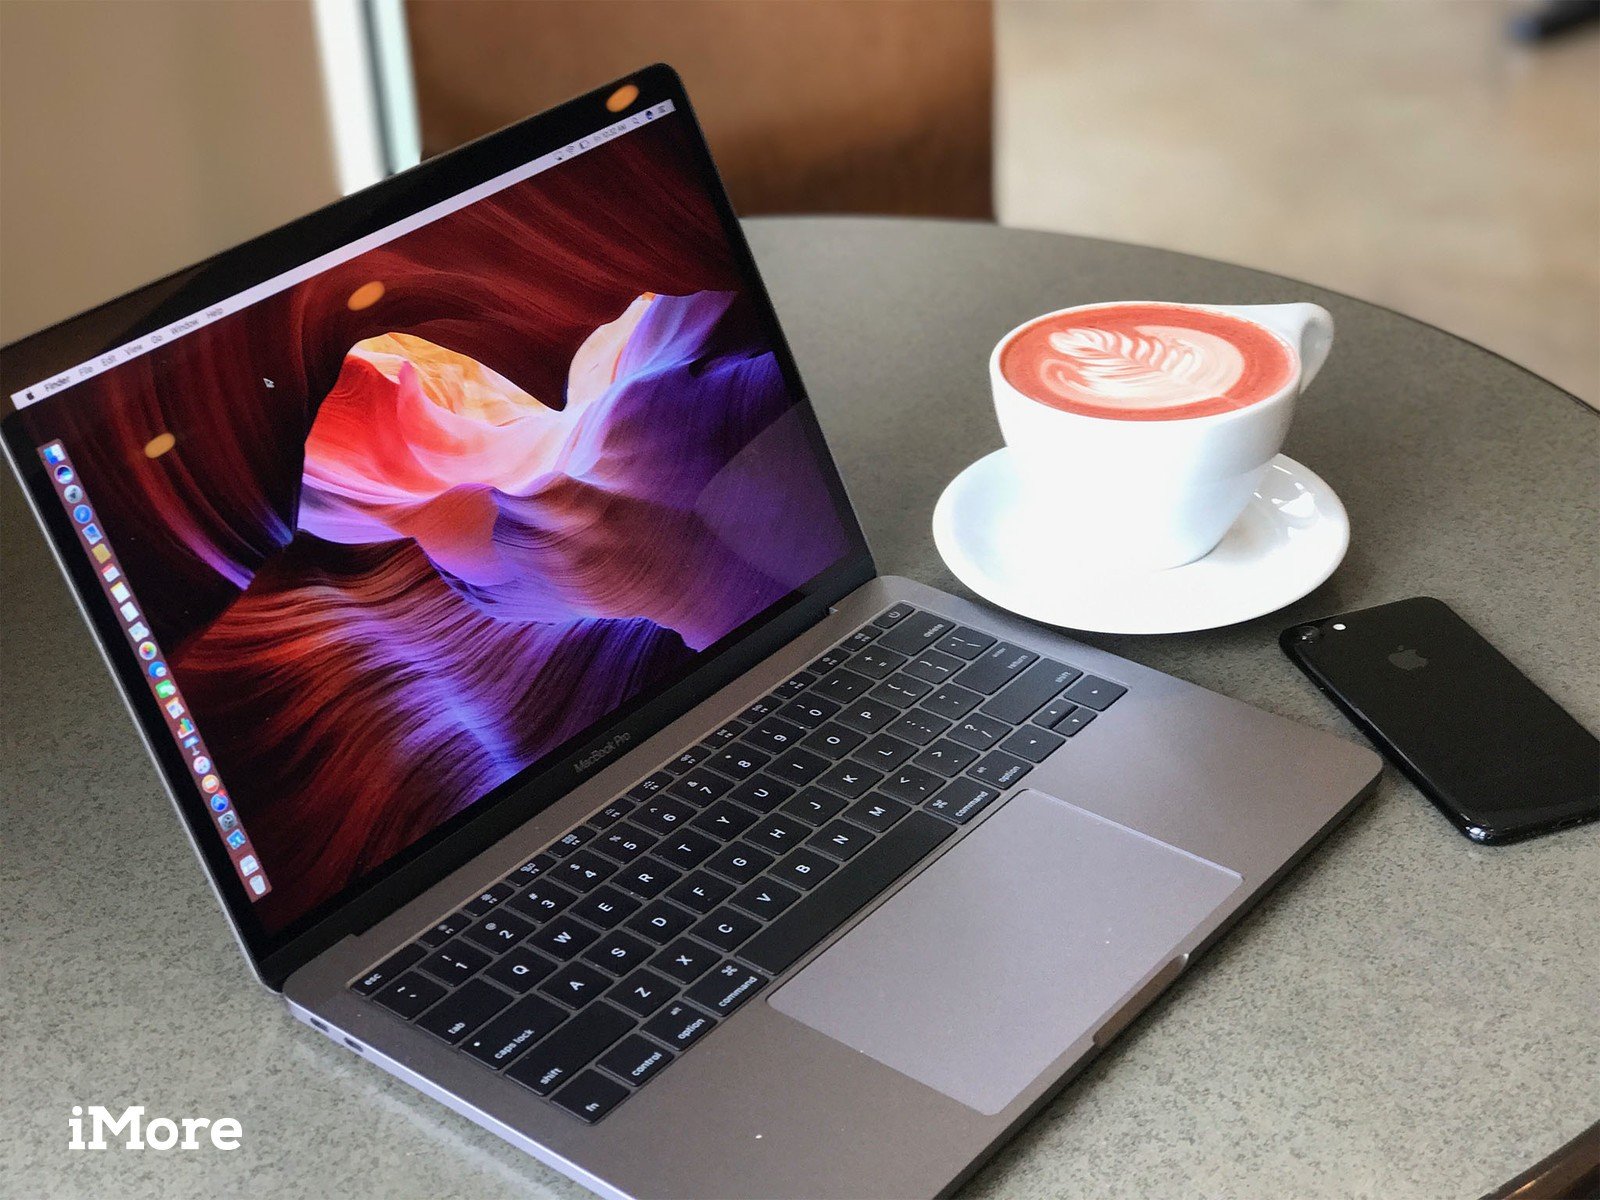 Top 10 free apps for macbook pro